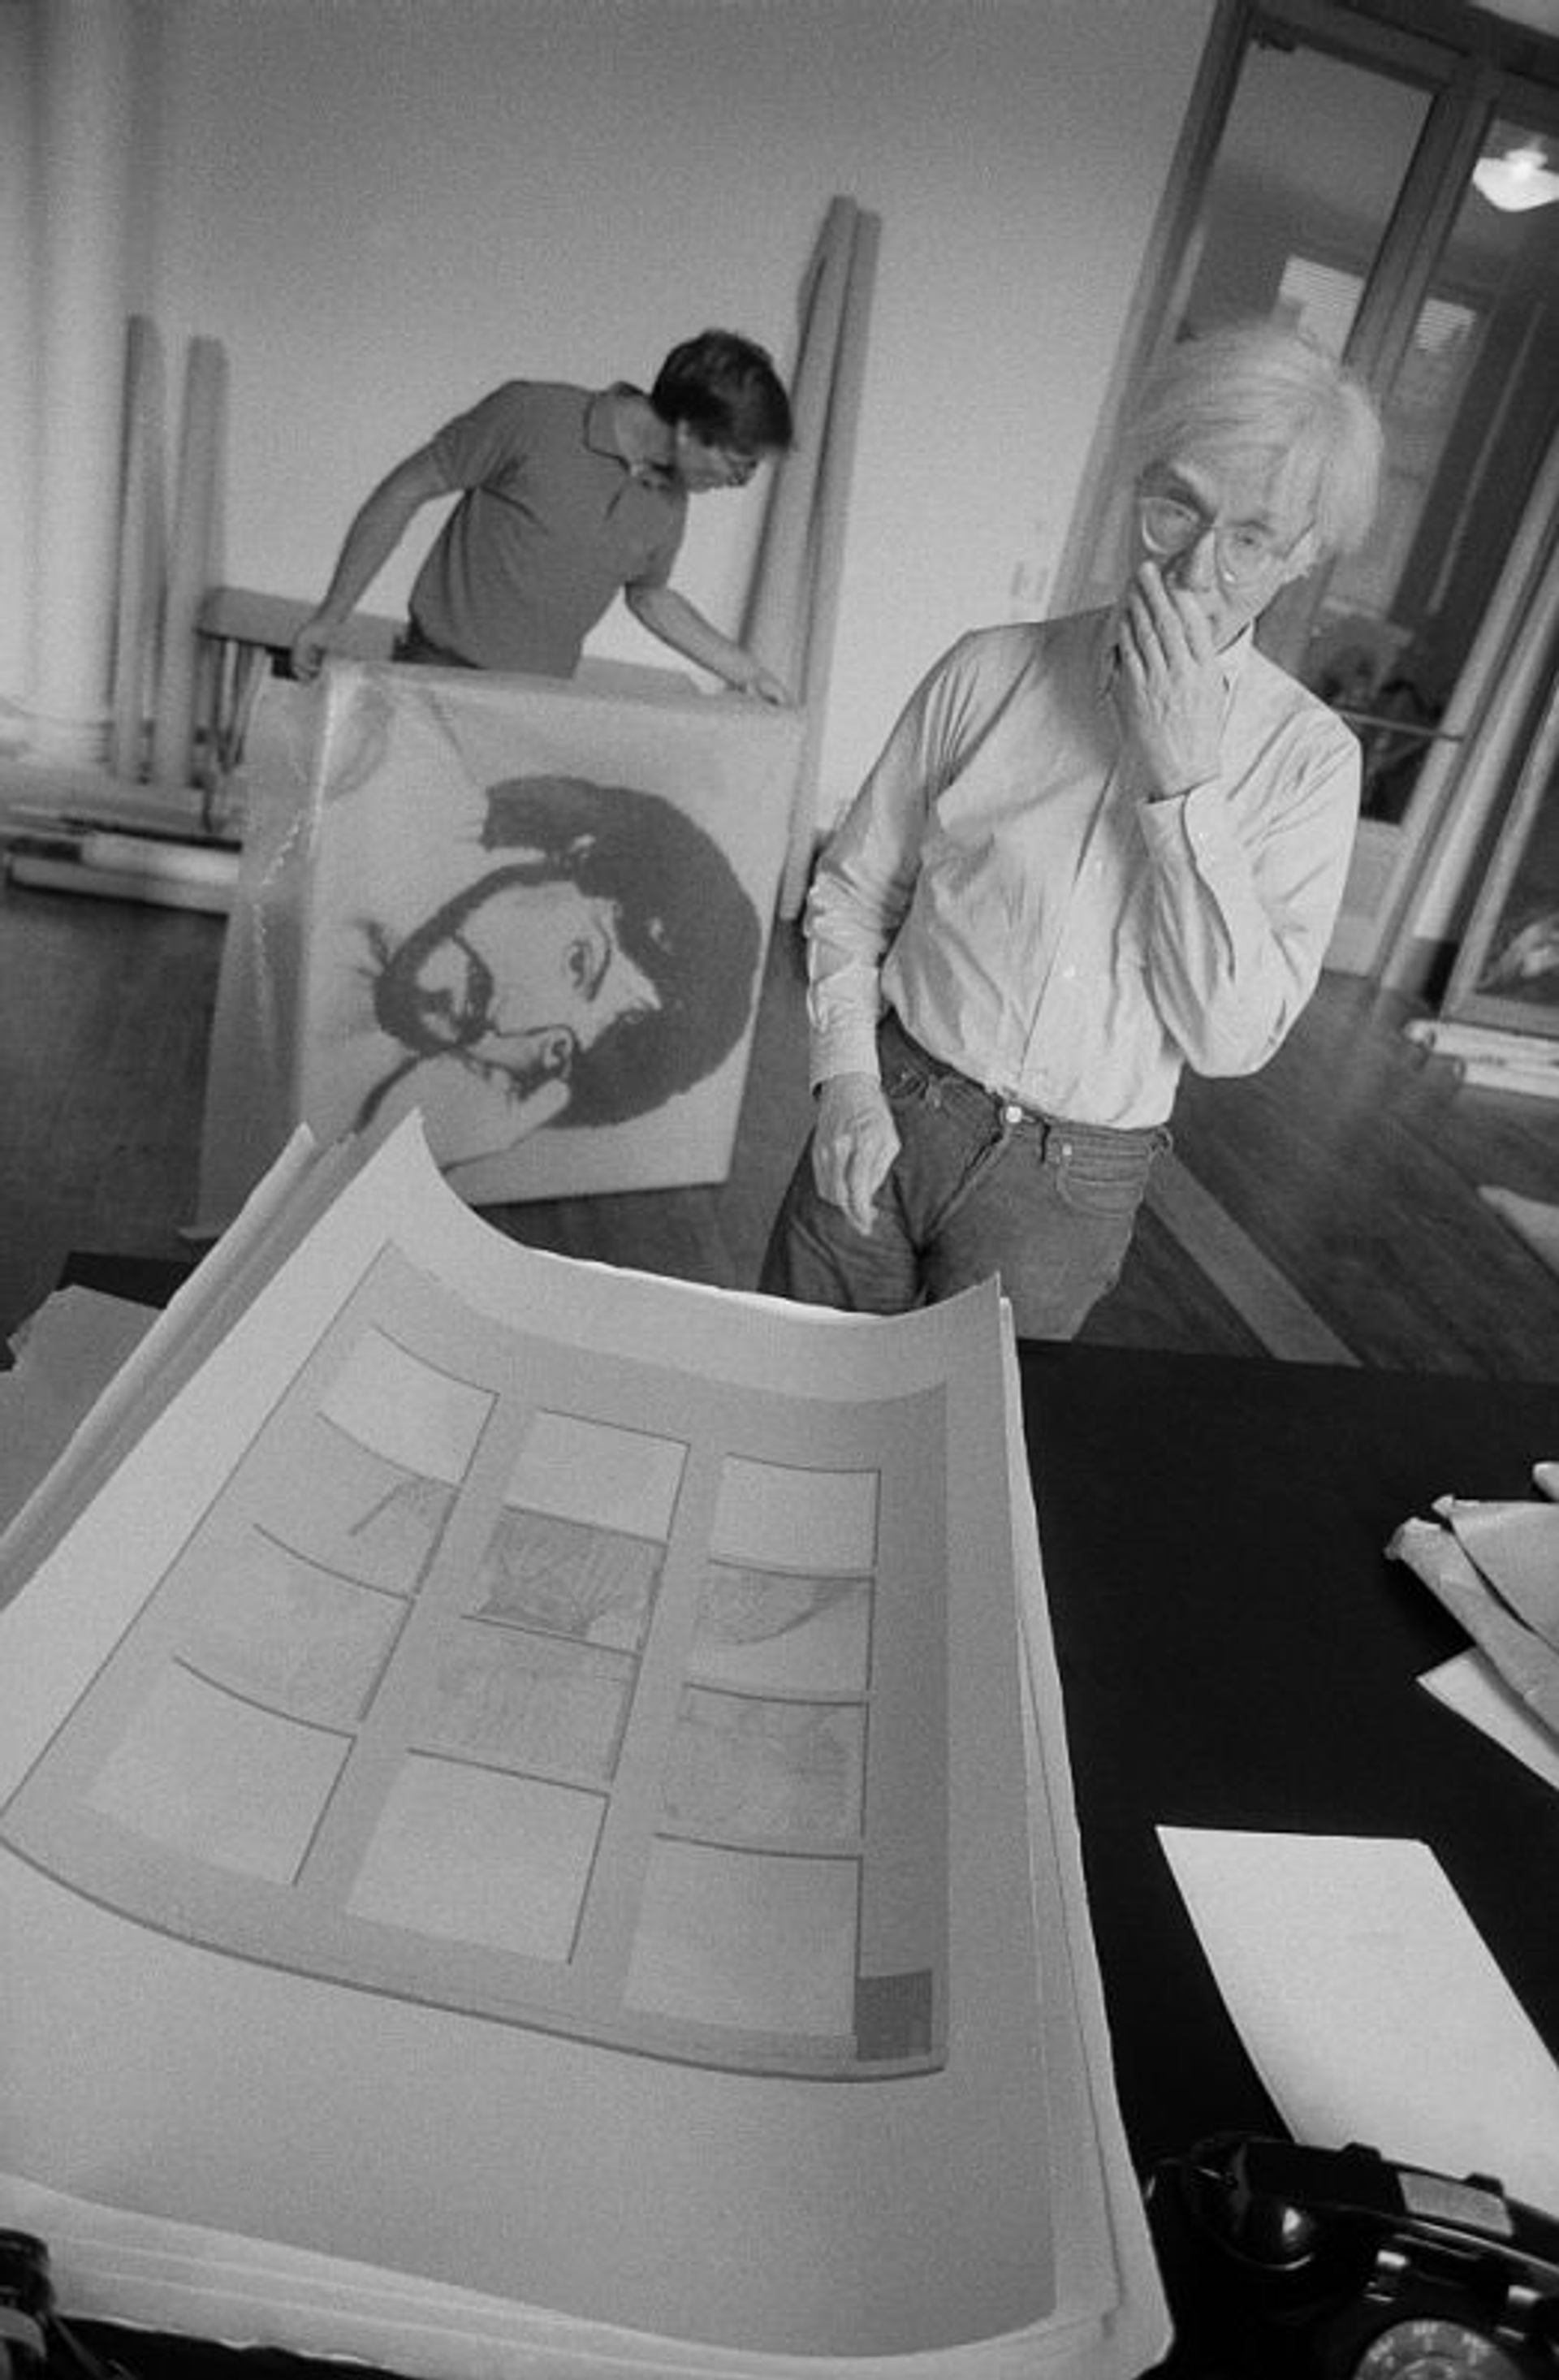 A black and white image of Andy Warhol looking at a silkscreen of banana split by Thomas Dellert.